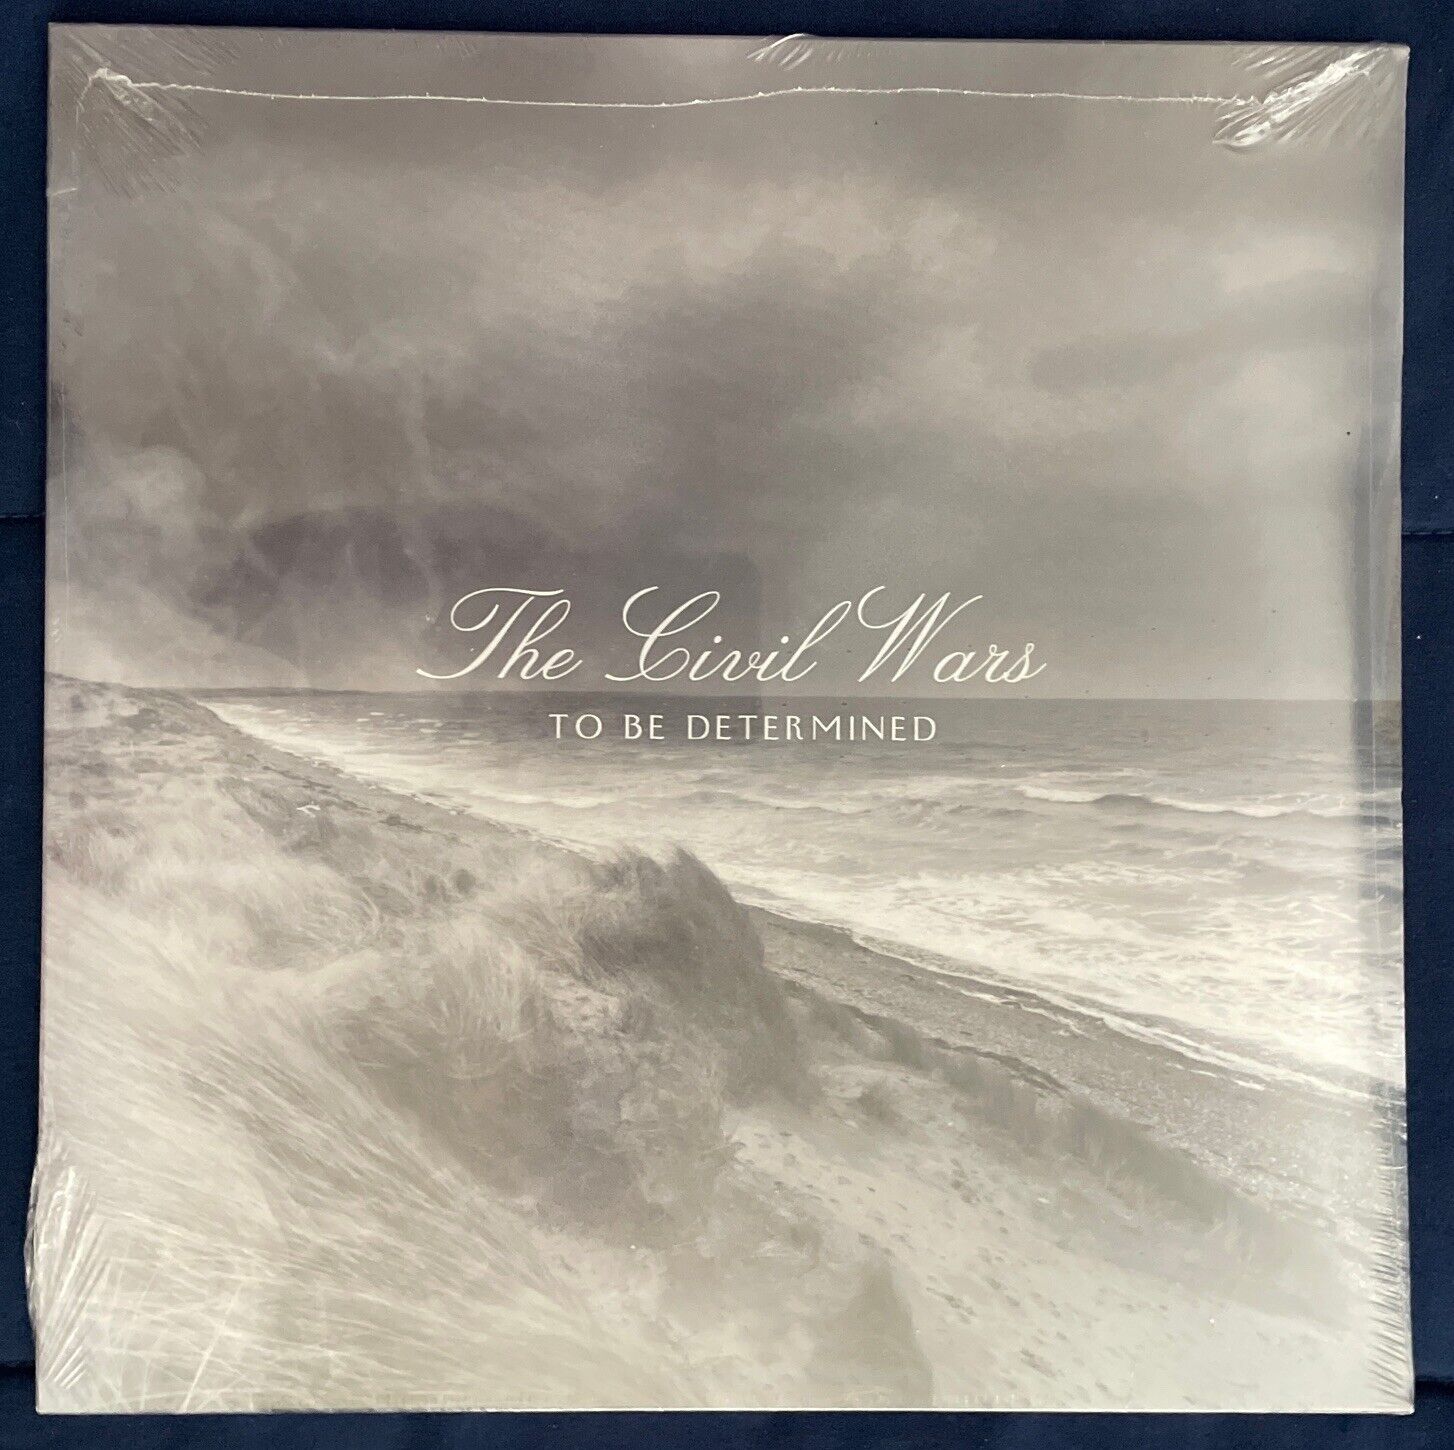 The Civil Wars To Be Determined 10” Vinyl Record (New/Sealed)